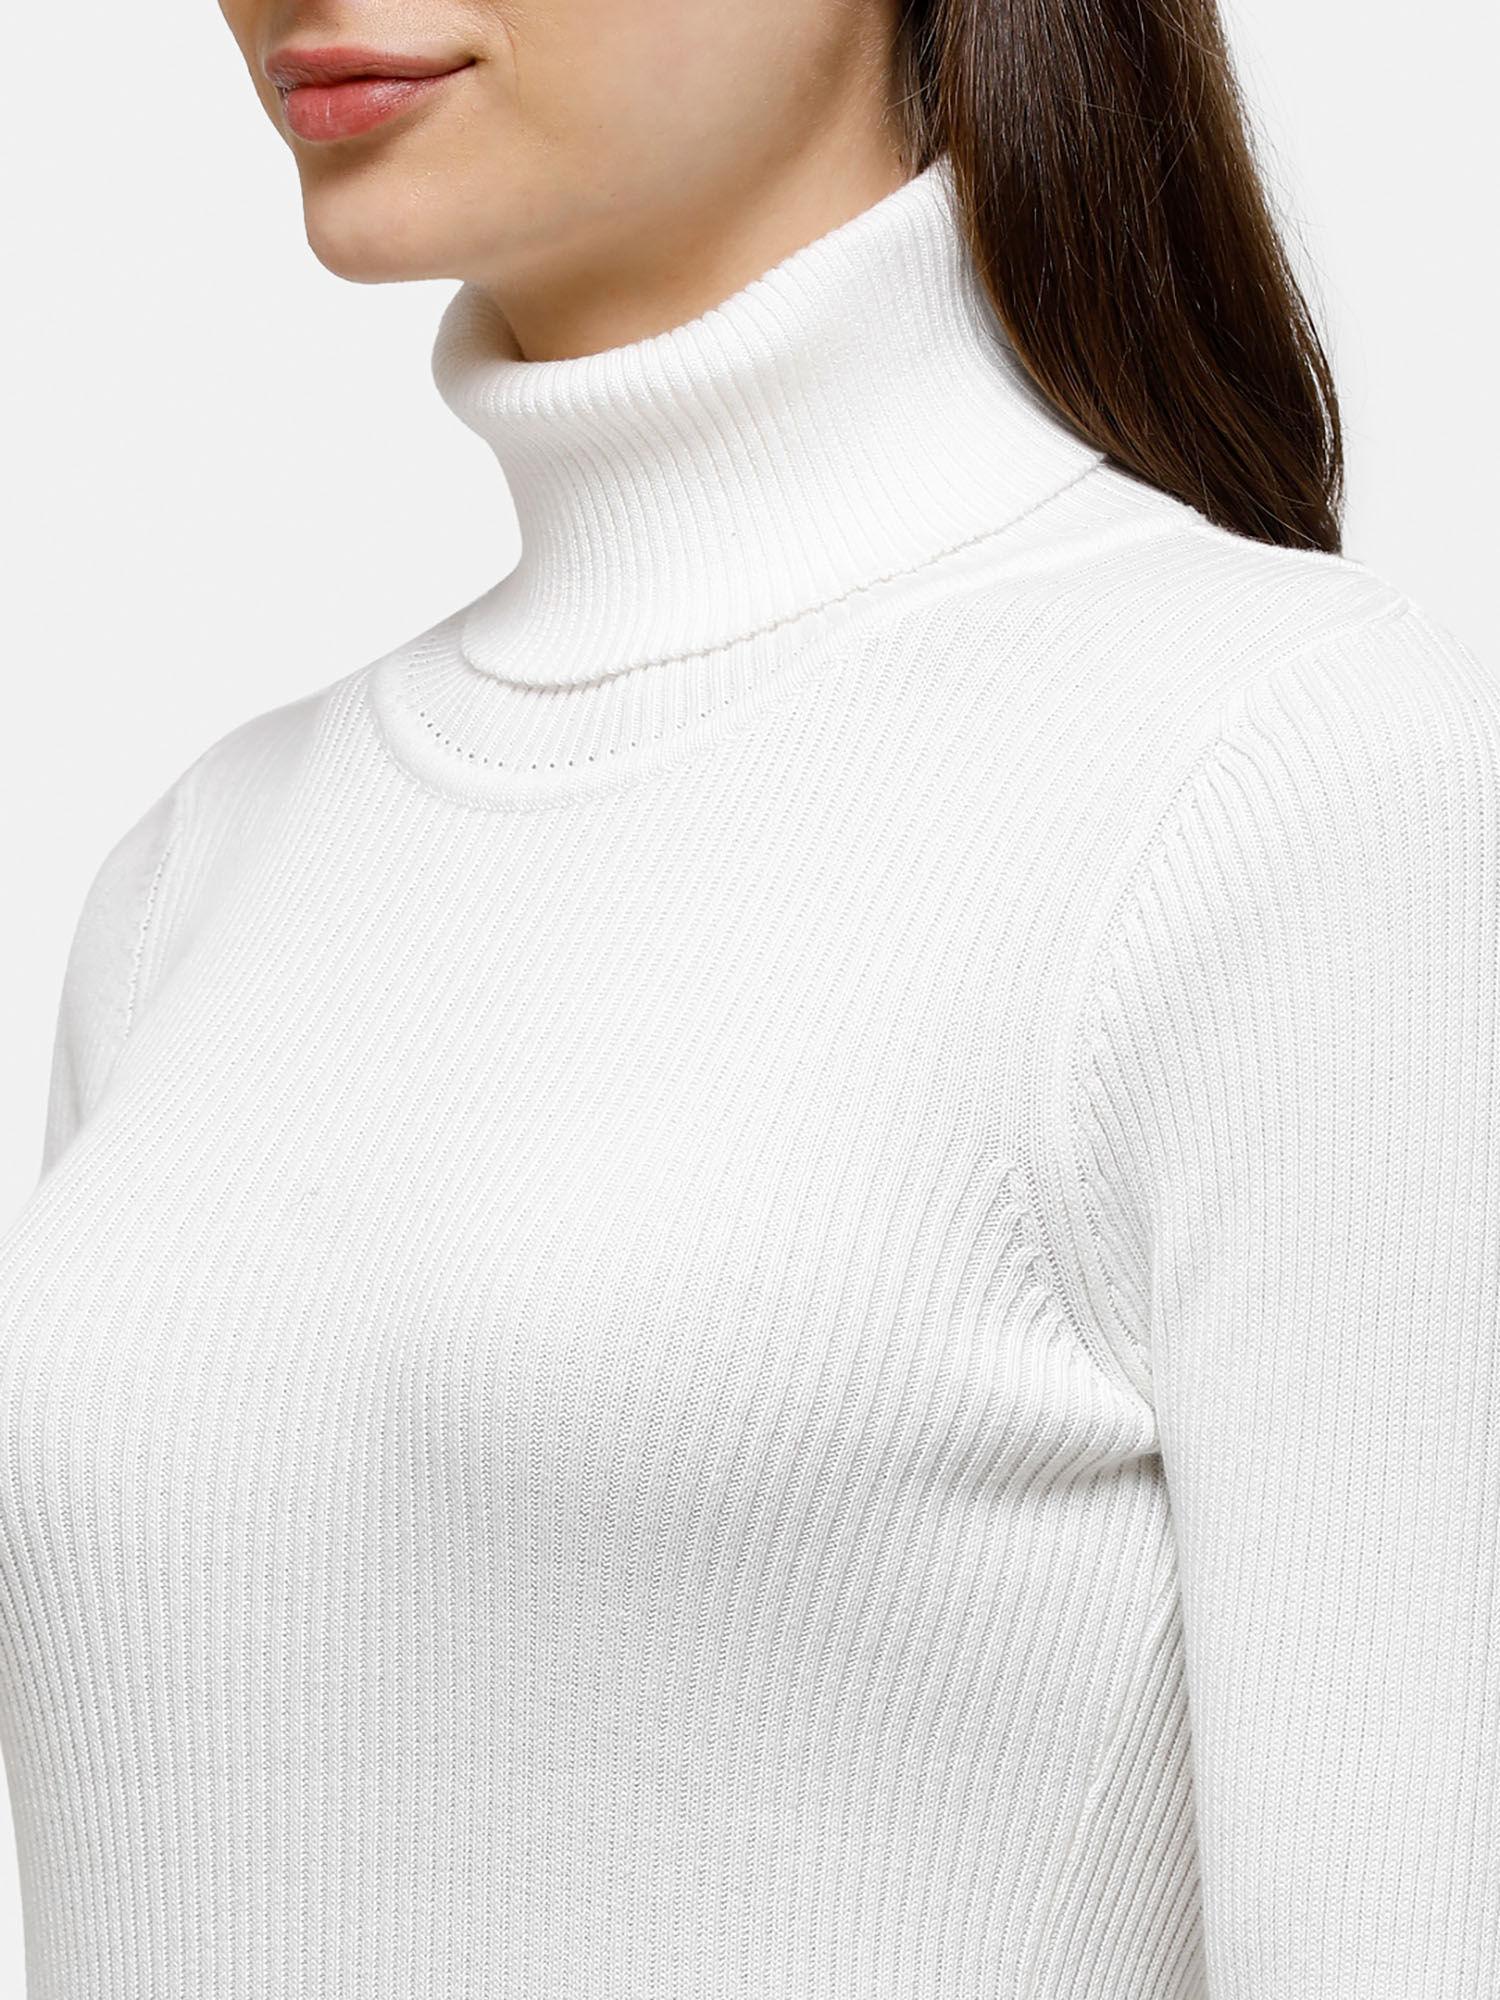 98 degree north's white full sleeves sweater